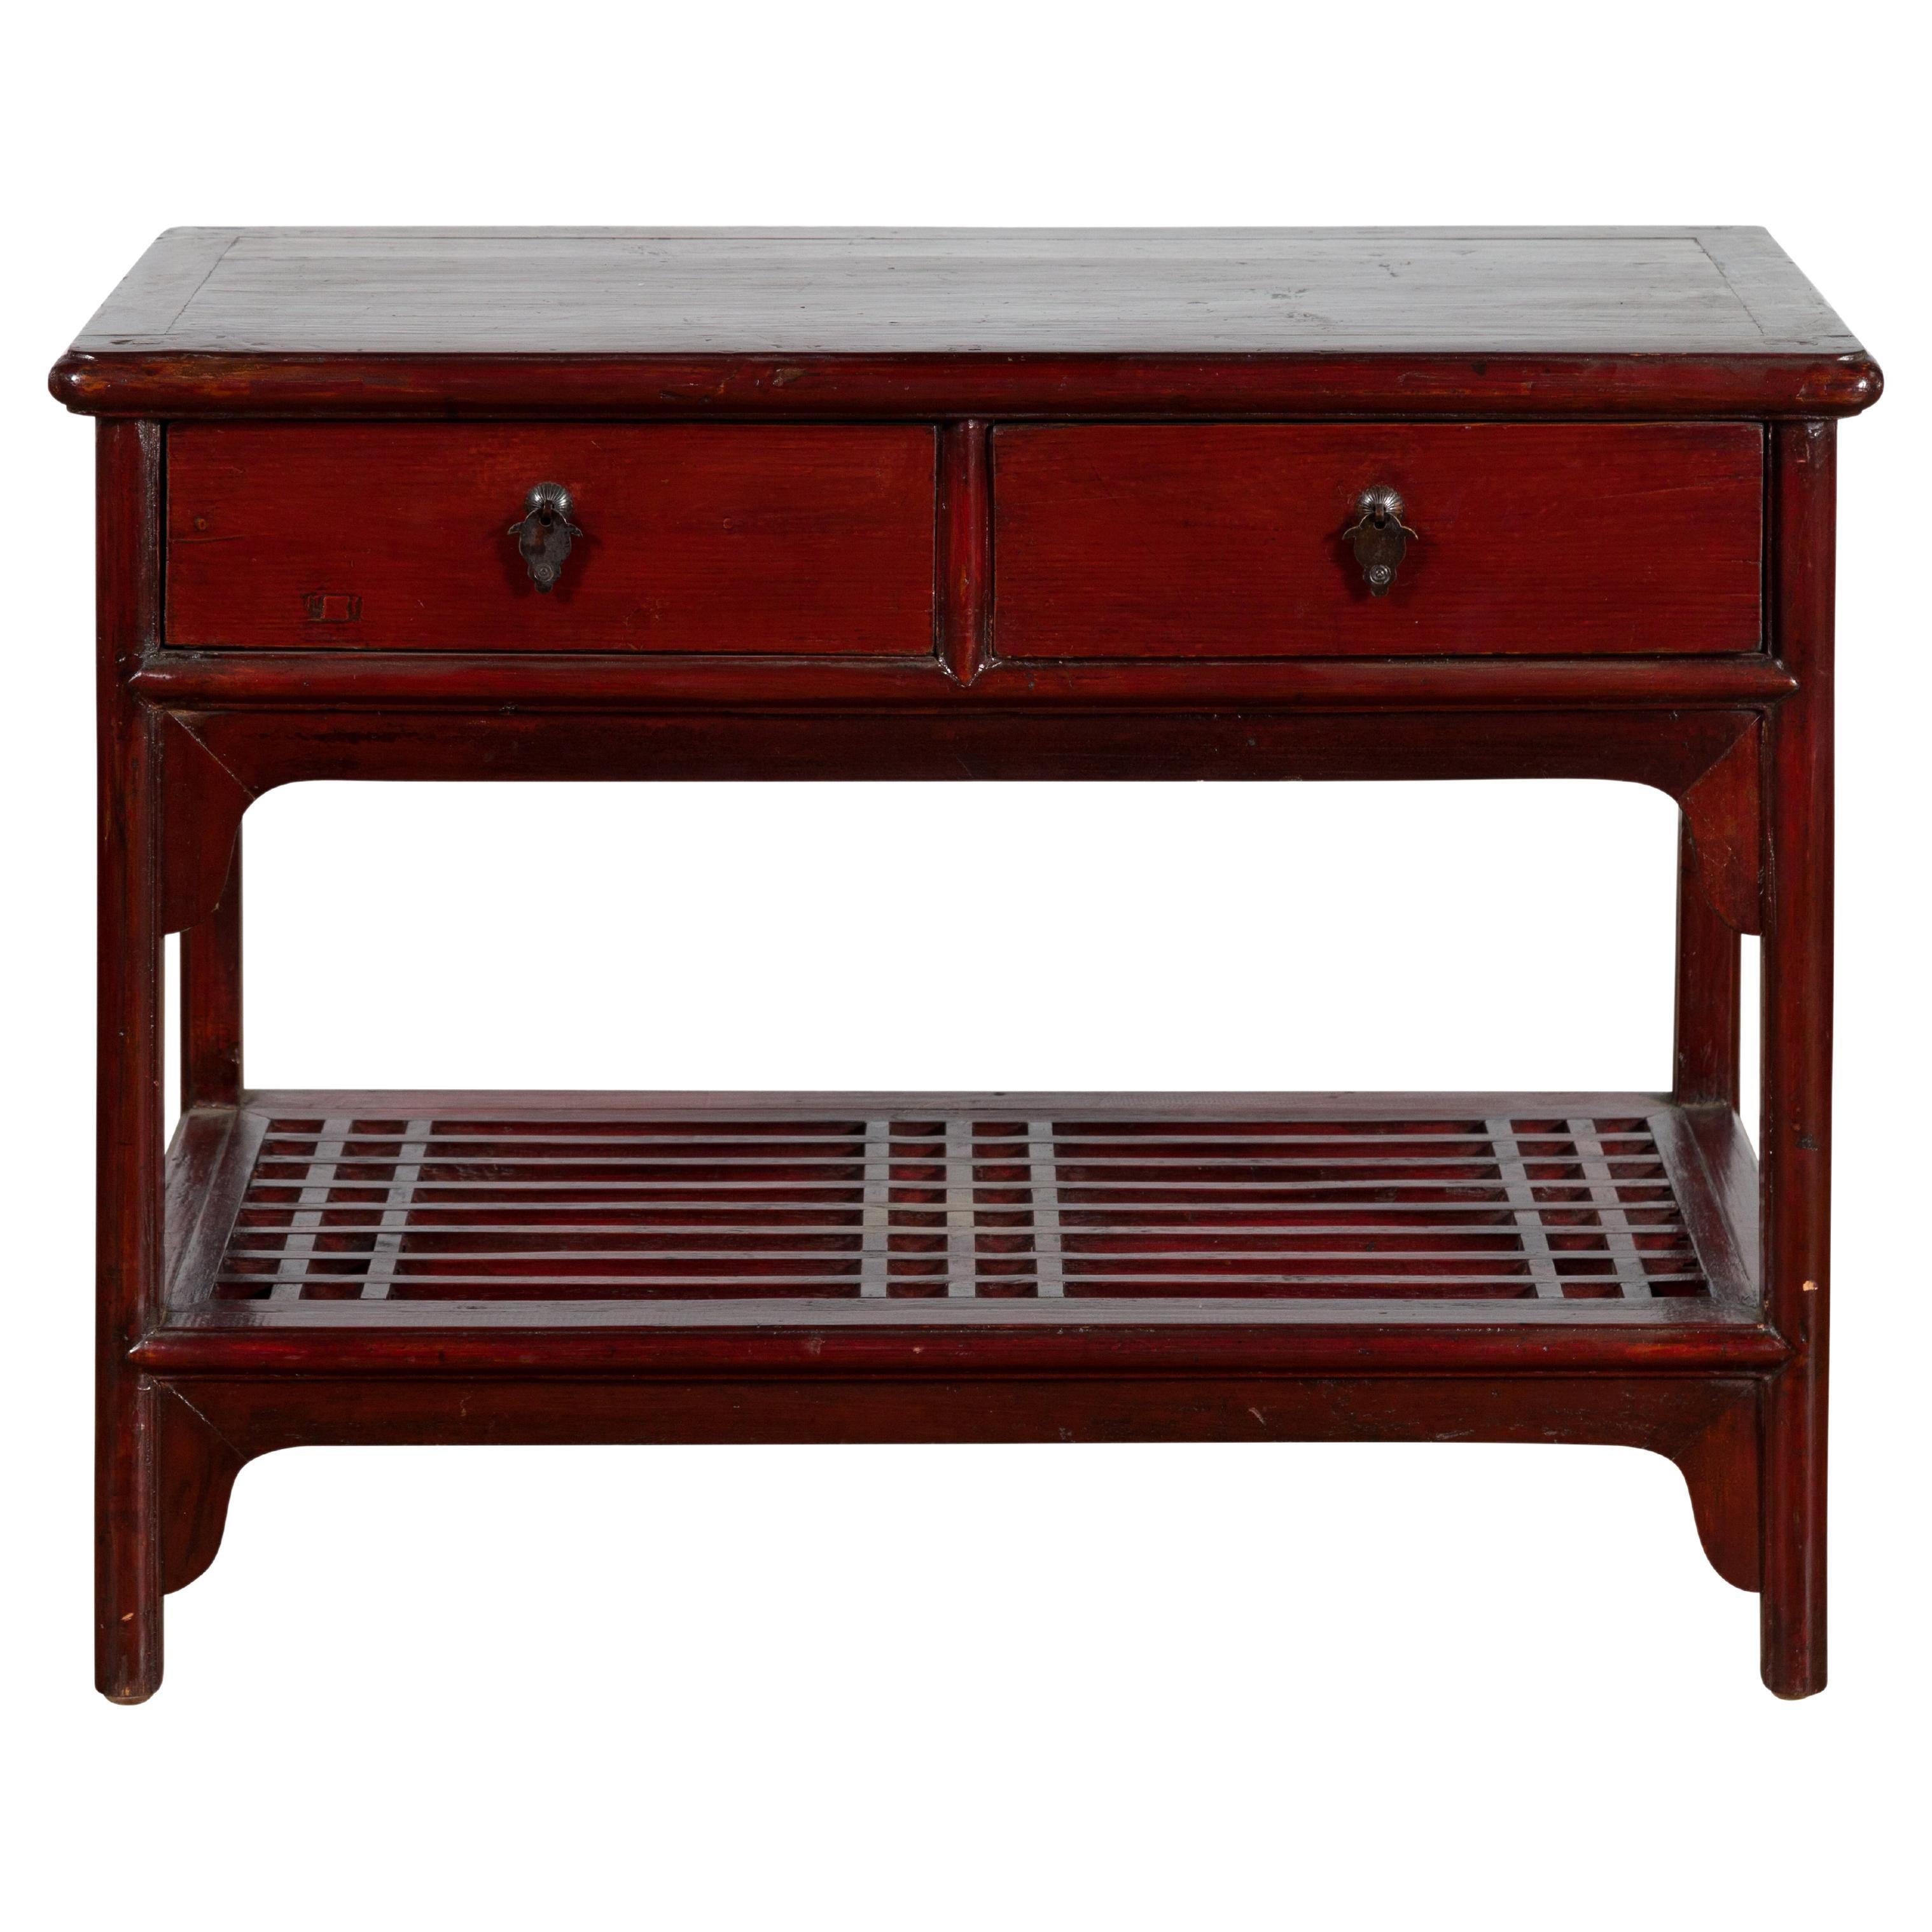 Chinese Vintage Oxblood Lacquer Side Table with Two Drawers and Fretwork Shelf For Sale